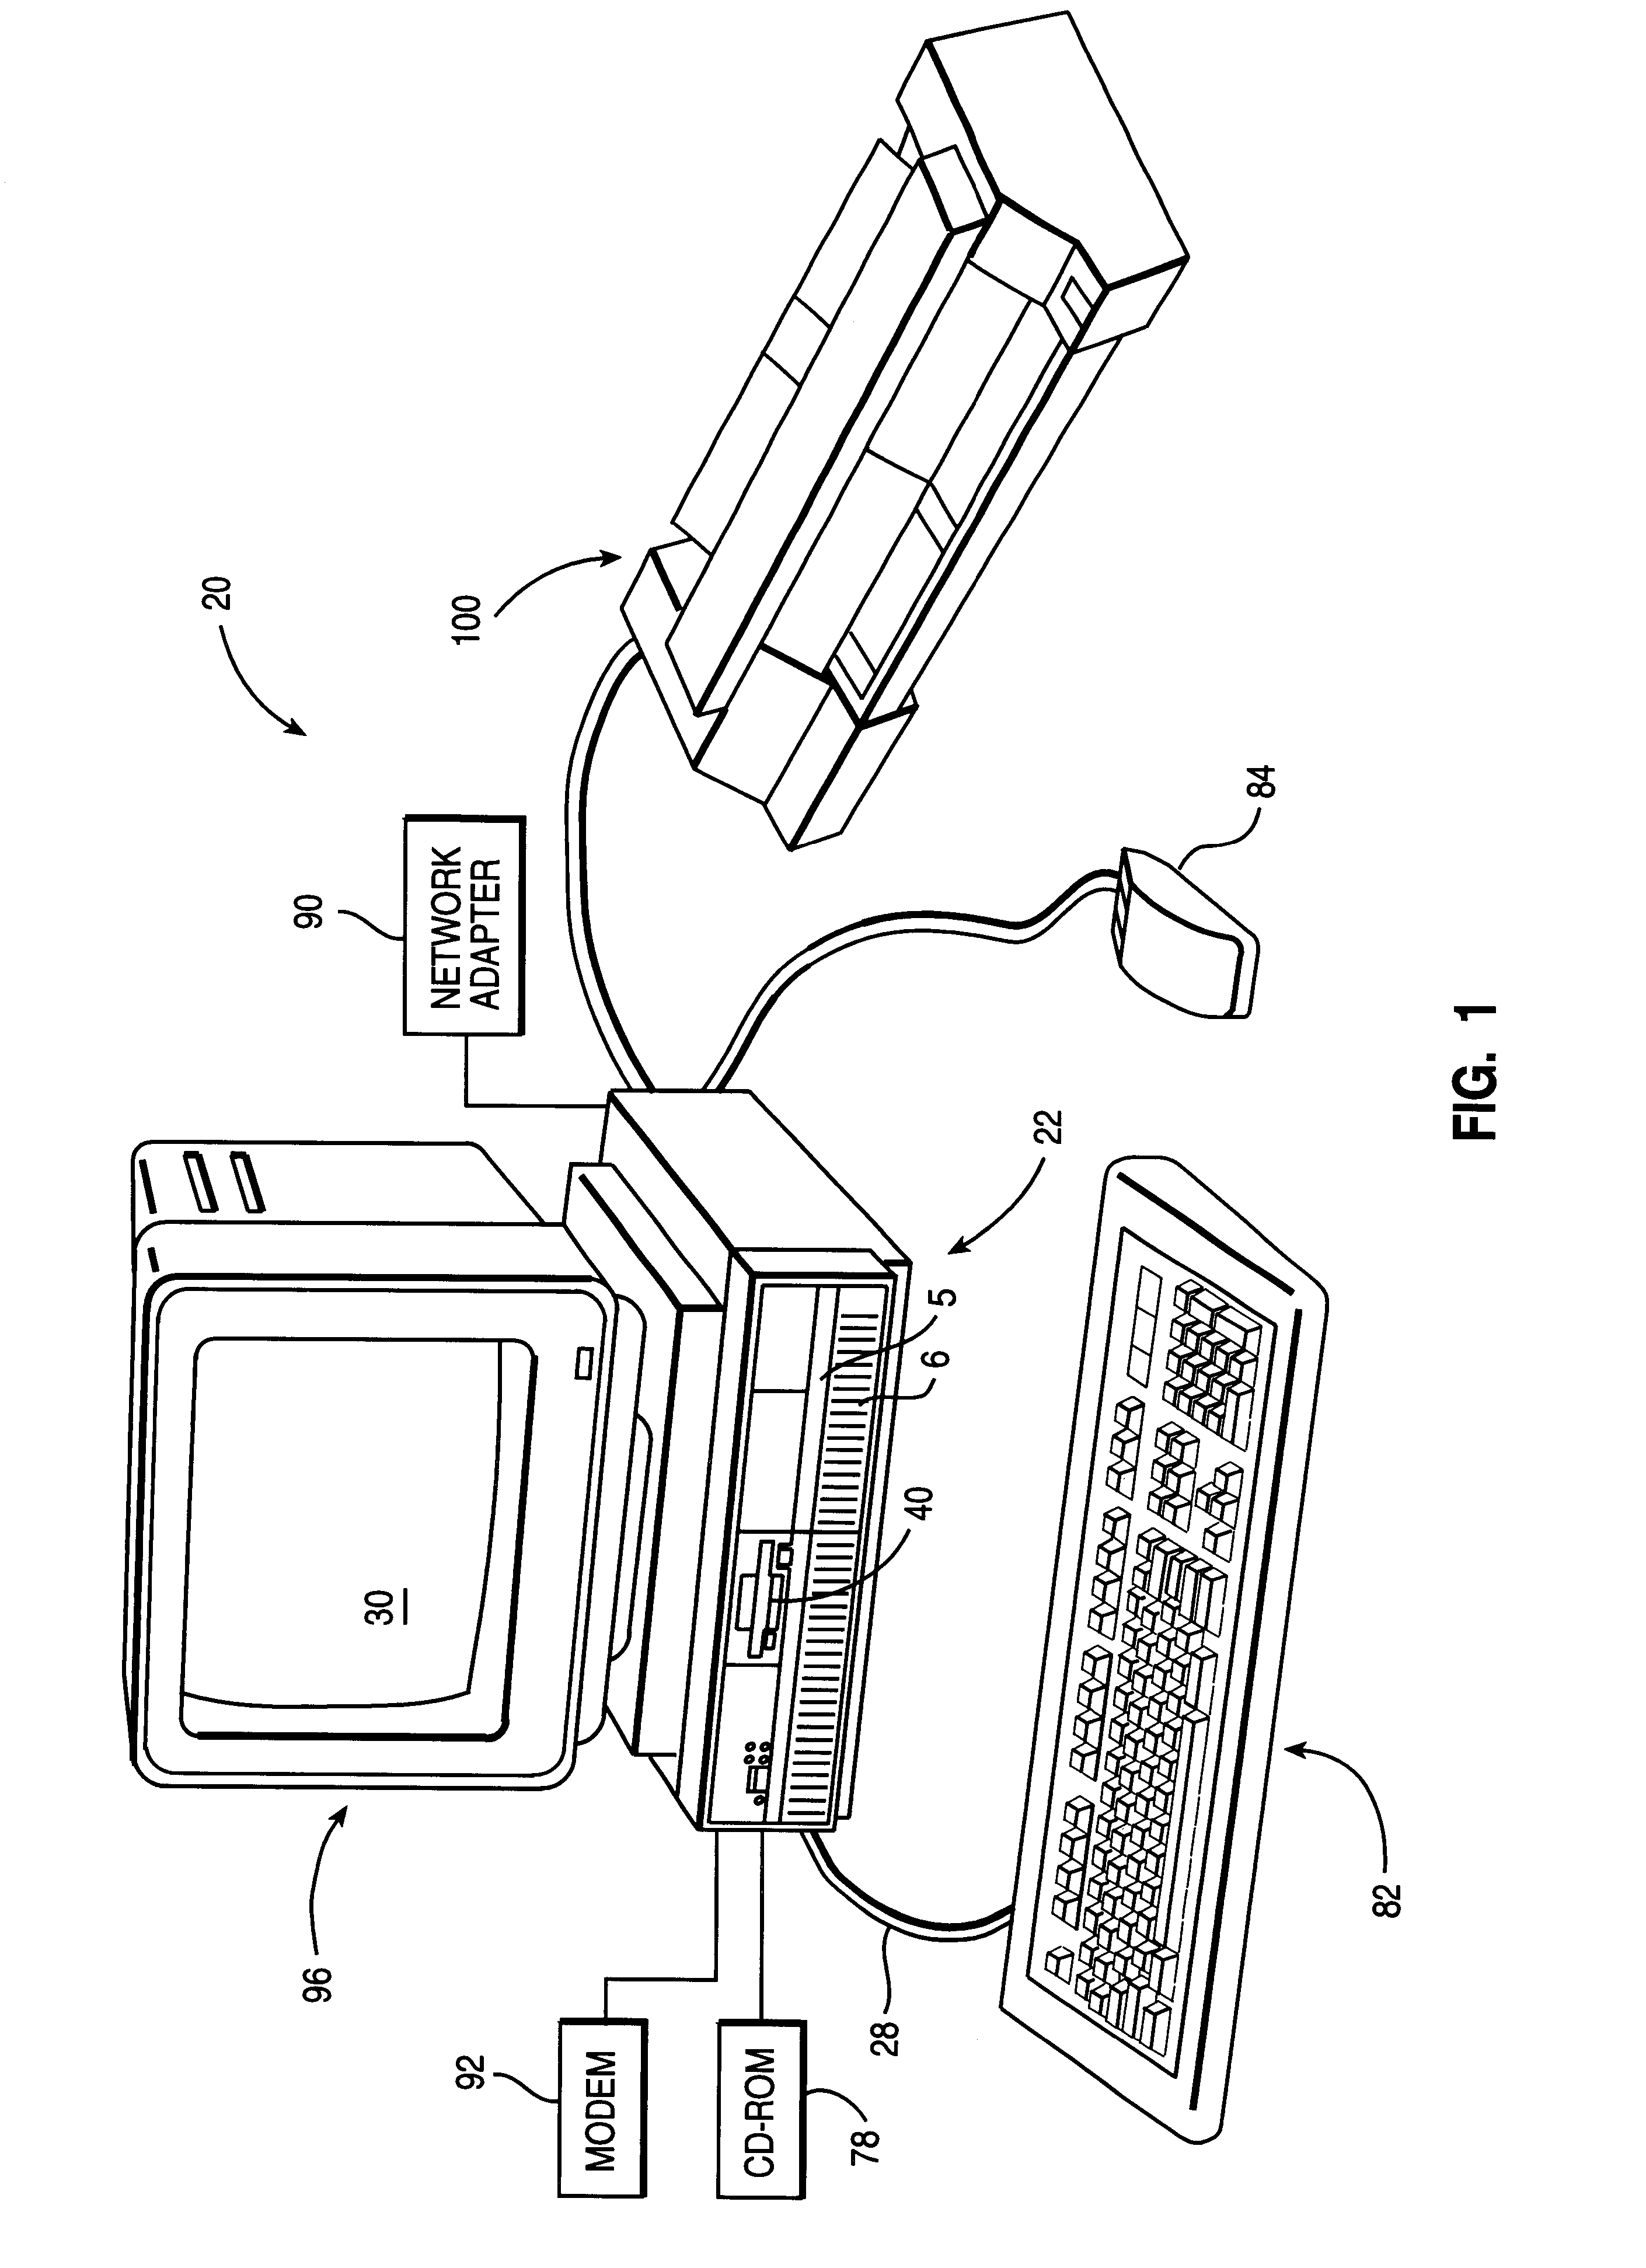 Method and apparatus for detecting actual viewing of electronic advertisements and transmitting the detected information